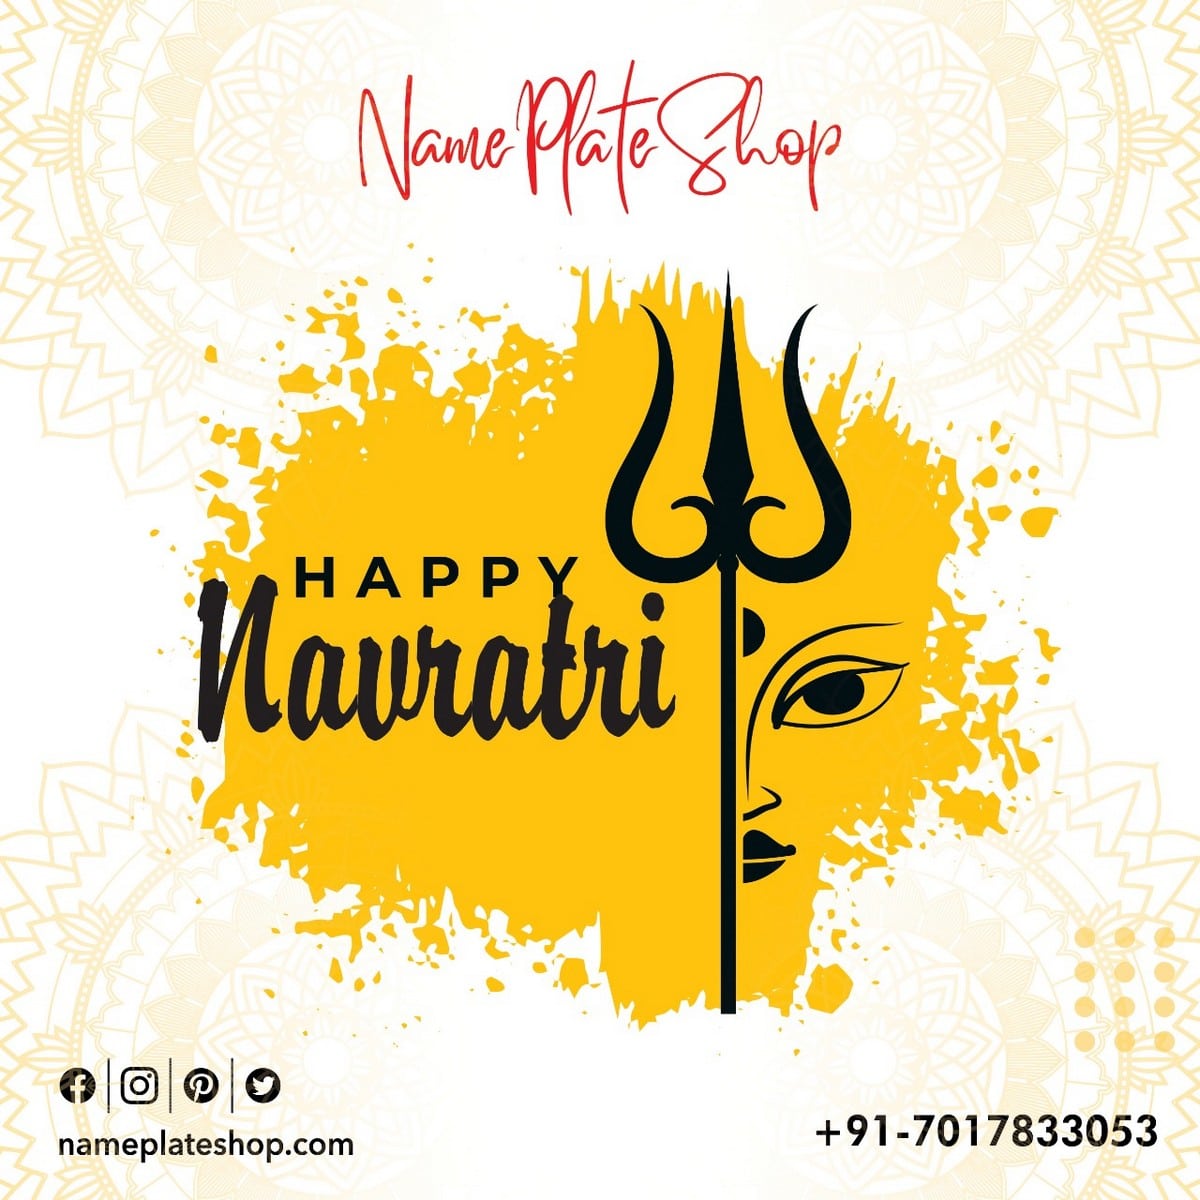 Download Happy Navratri Ethnic Cultural Indian Festival Background Wishes  Card | CorelDraw Design (Download Free CDR, Vector, Stock Images,  Tutorials, Tips & Tricks)